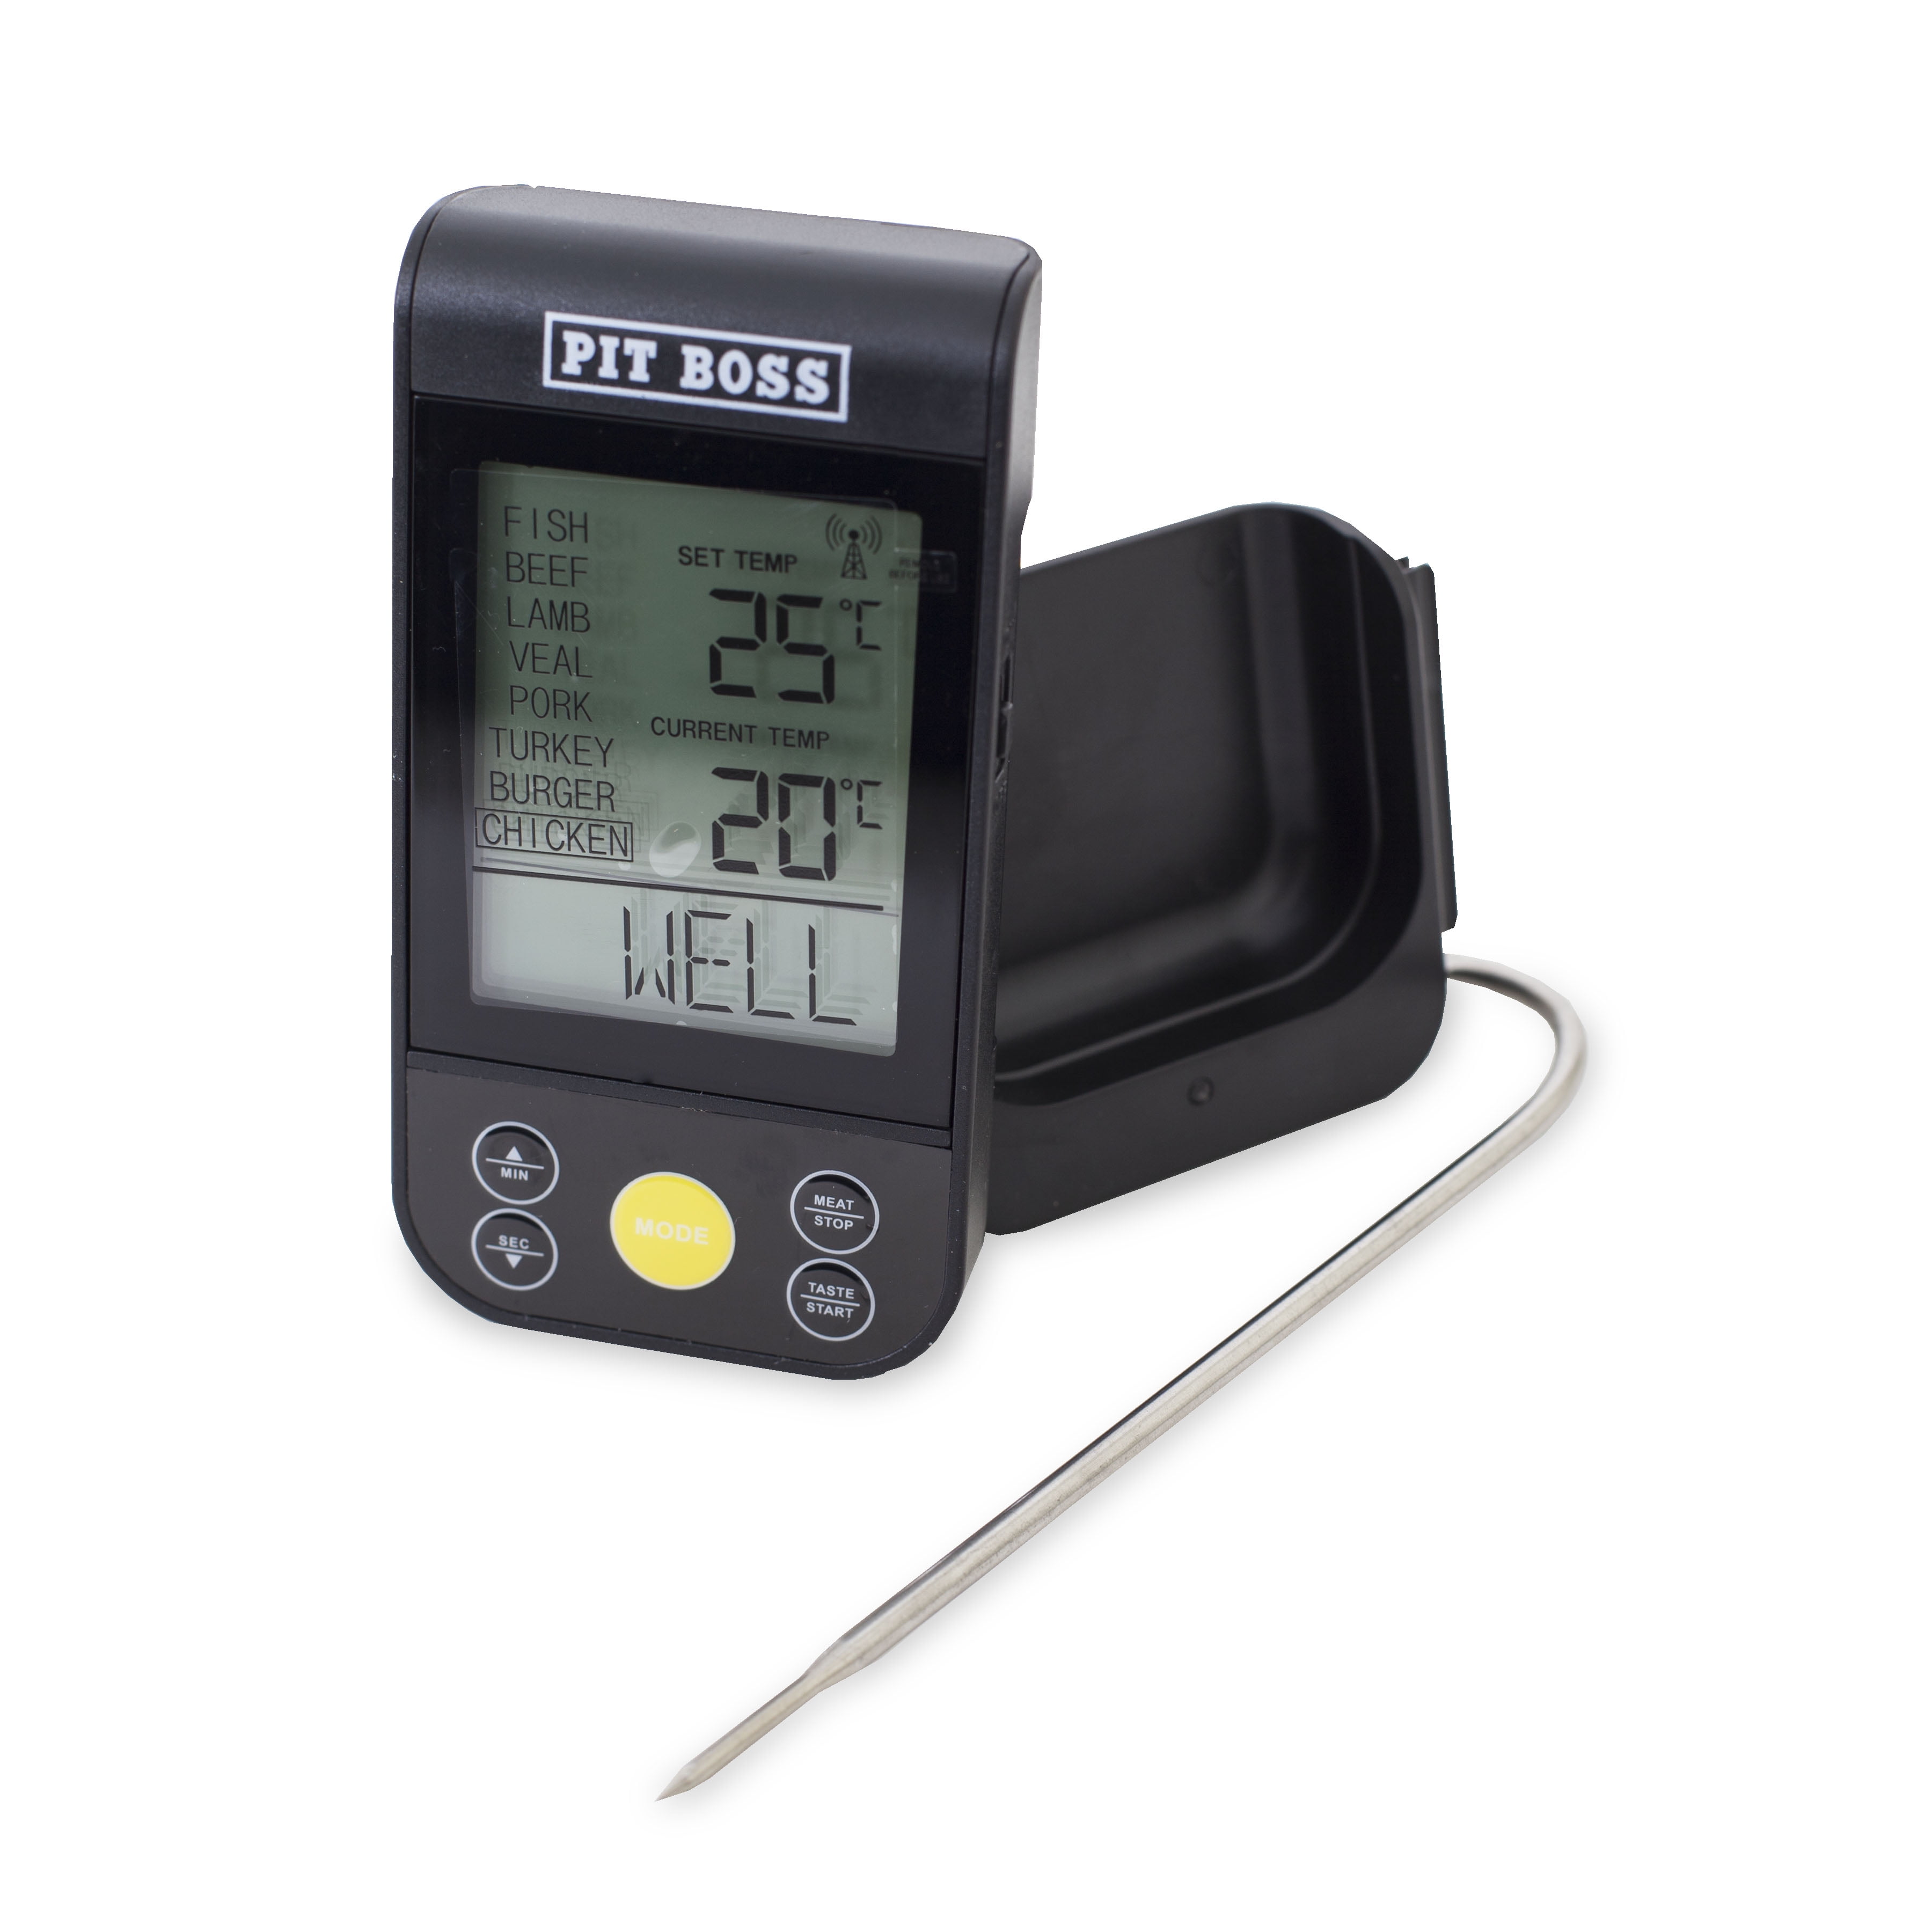 Pit Boss Wireless Remote Barbecue Grill Thermometer - LED Readout